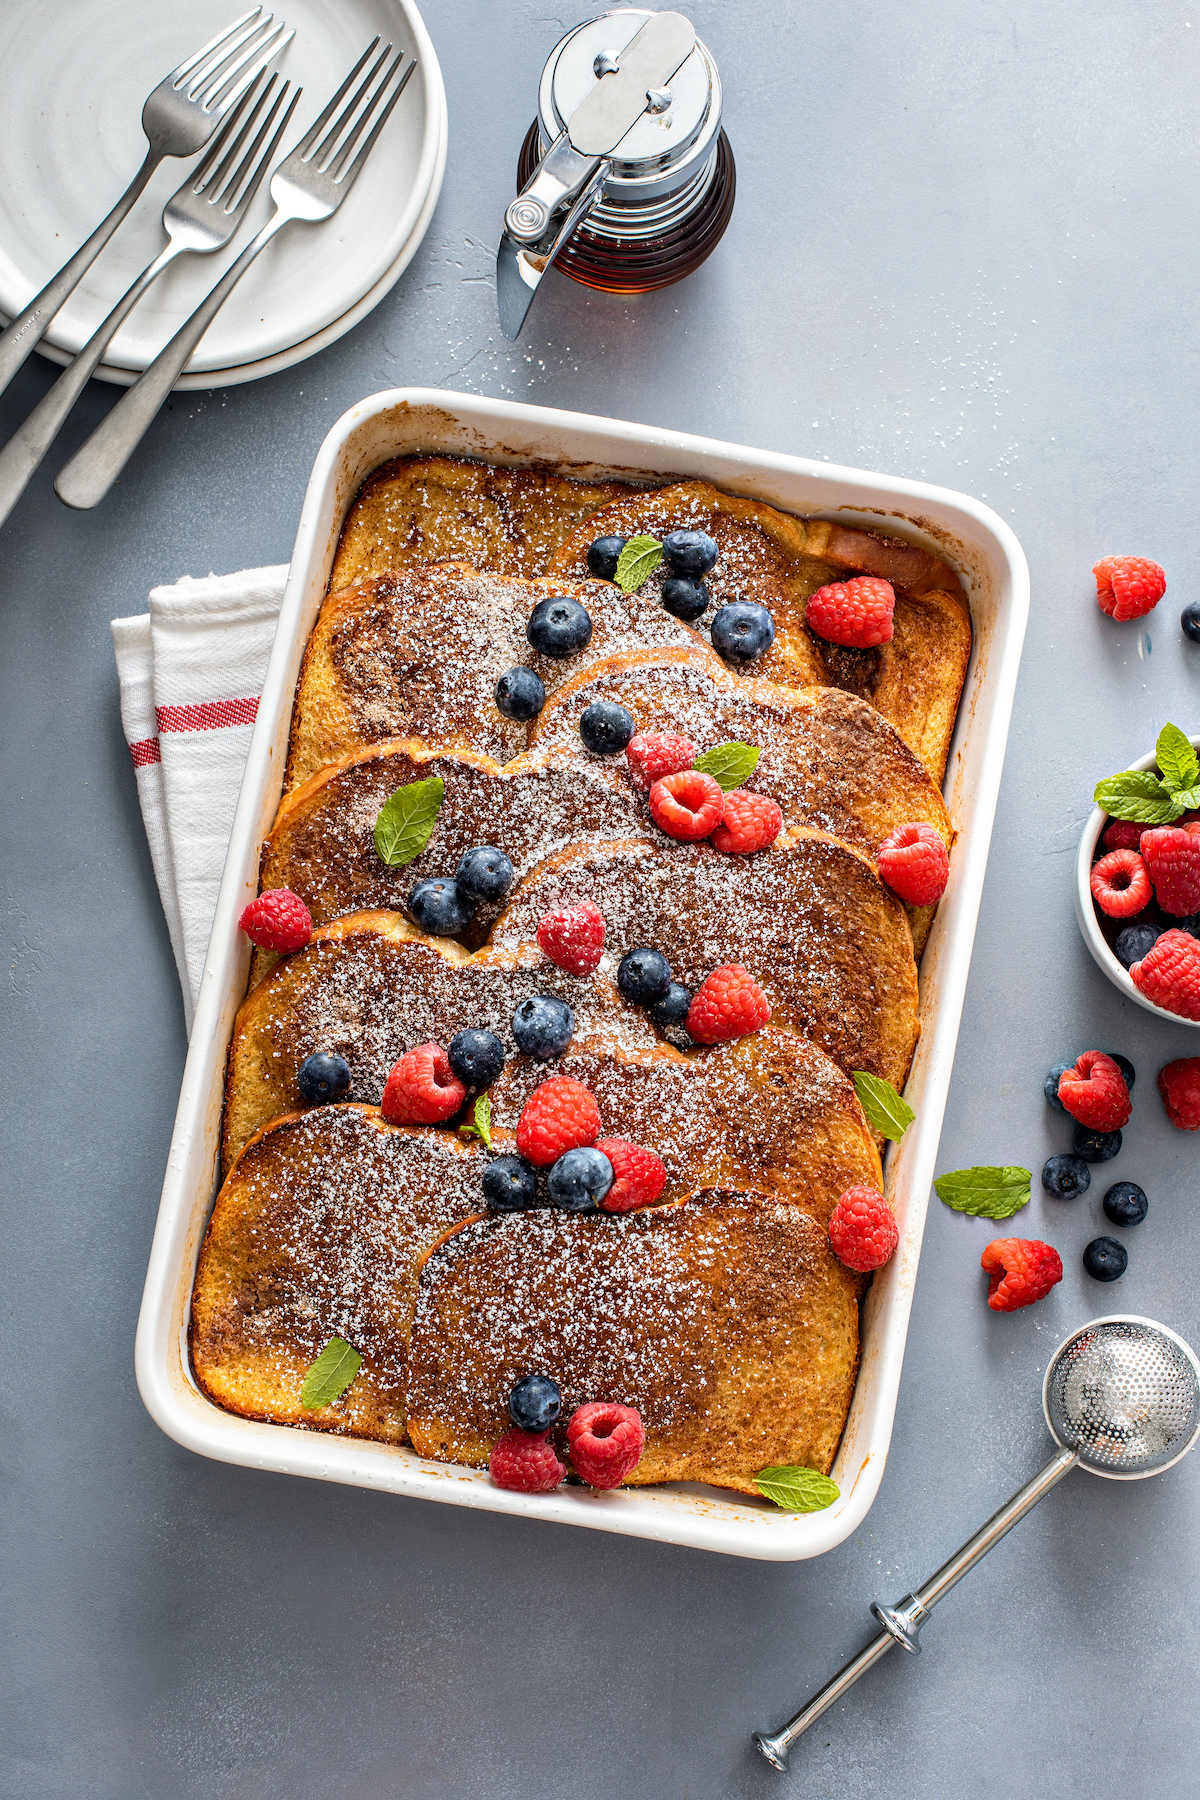 Bake French toast with fresh fruit and syrup.